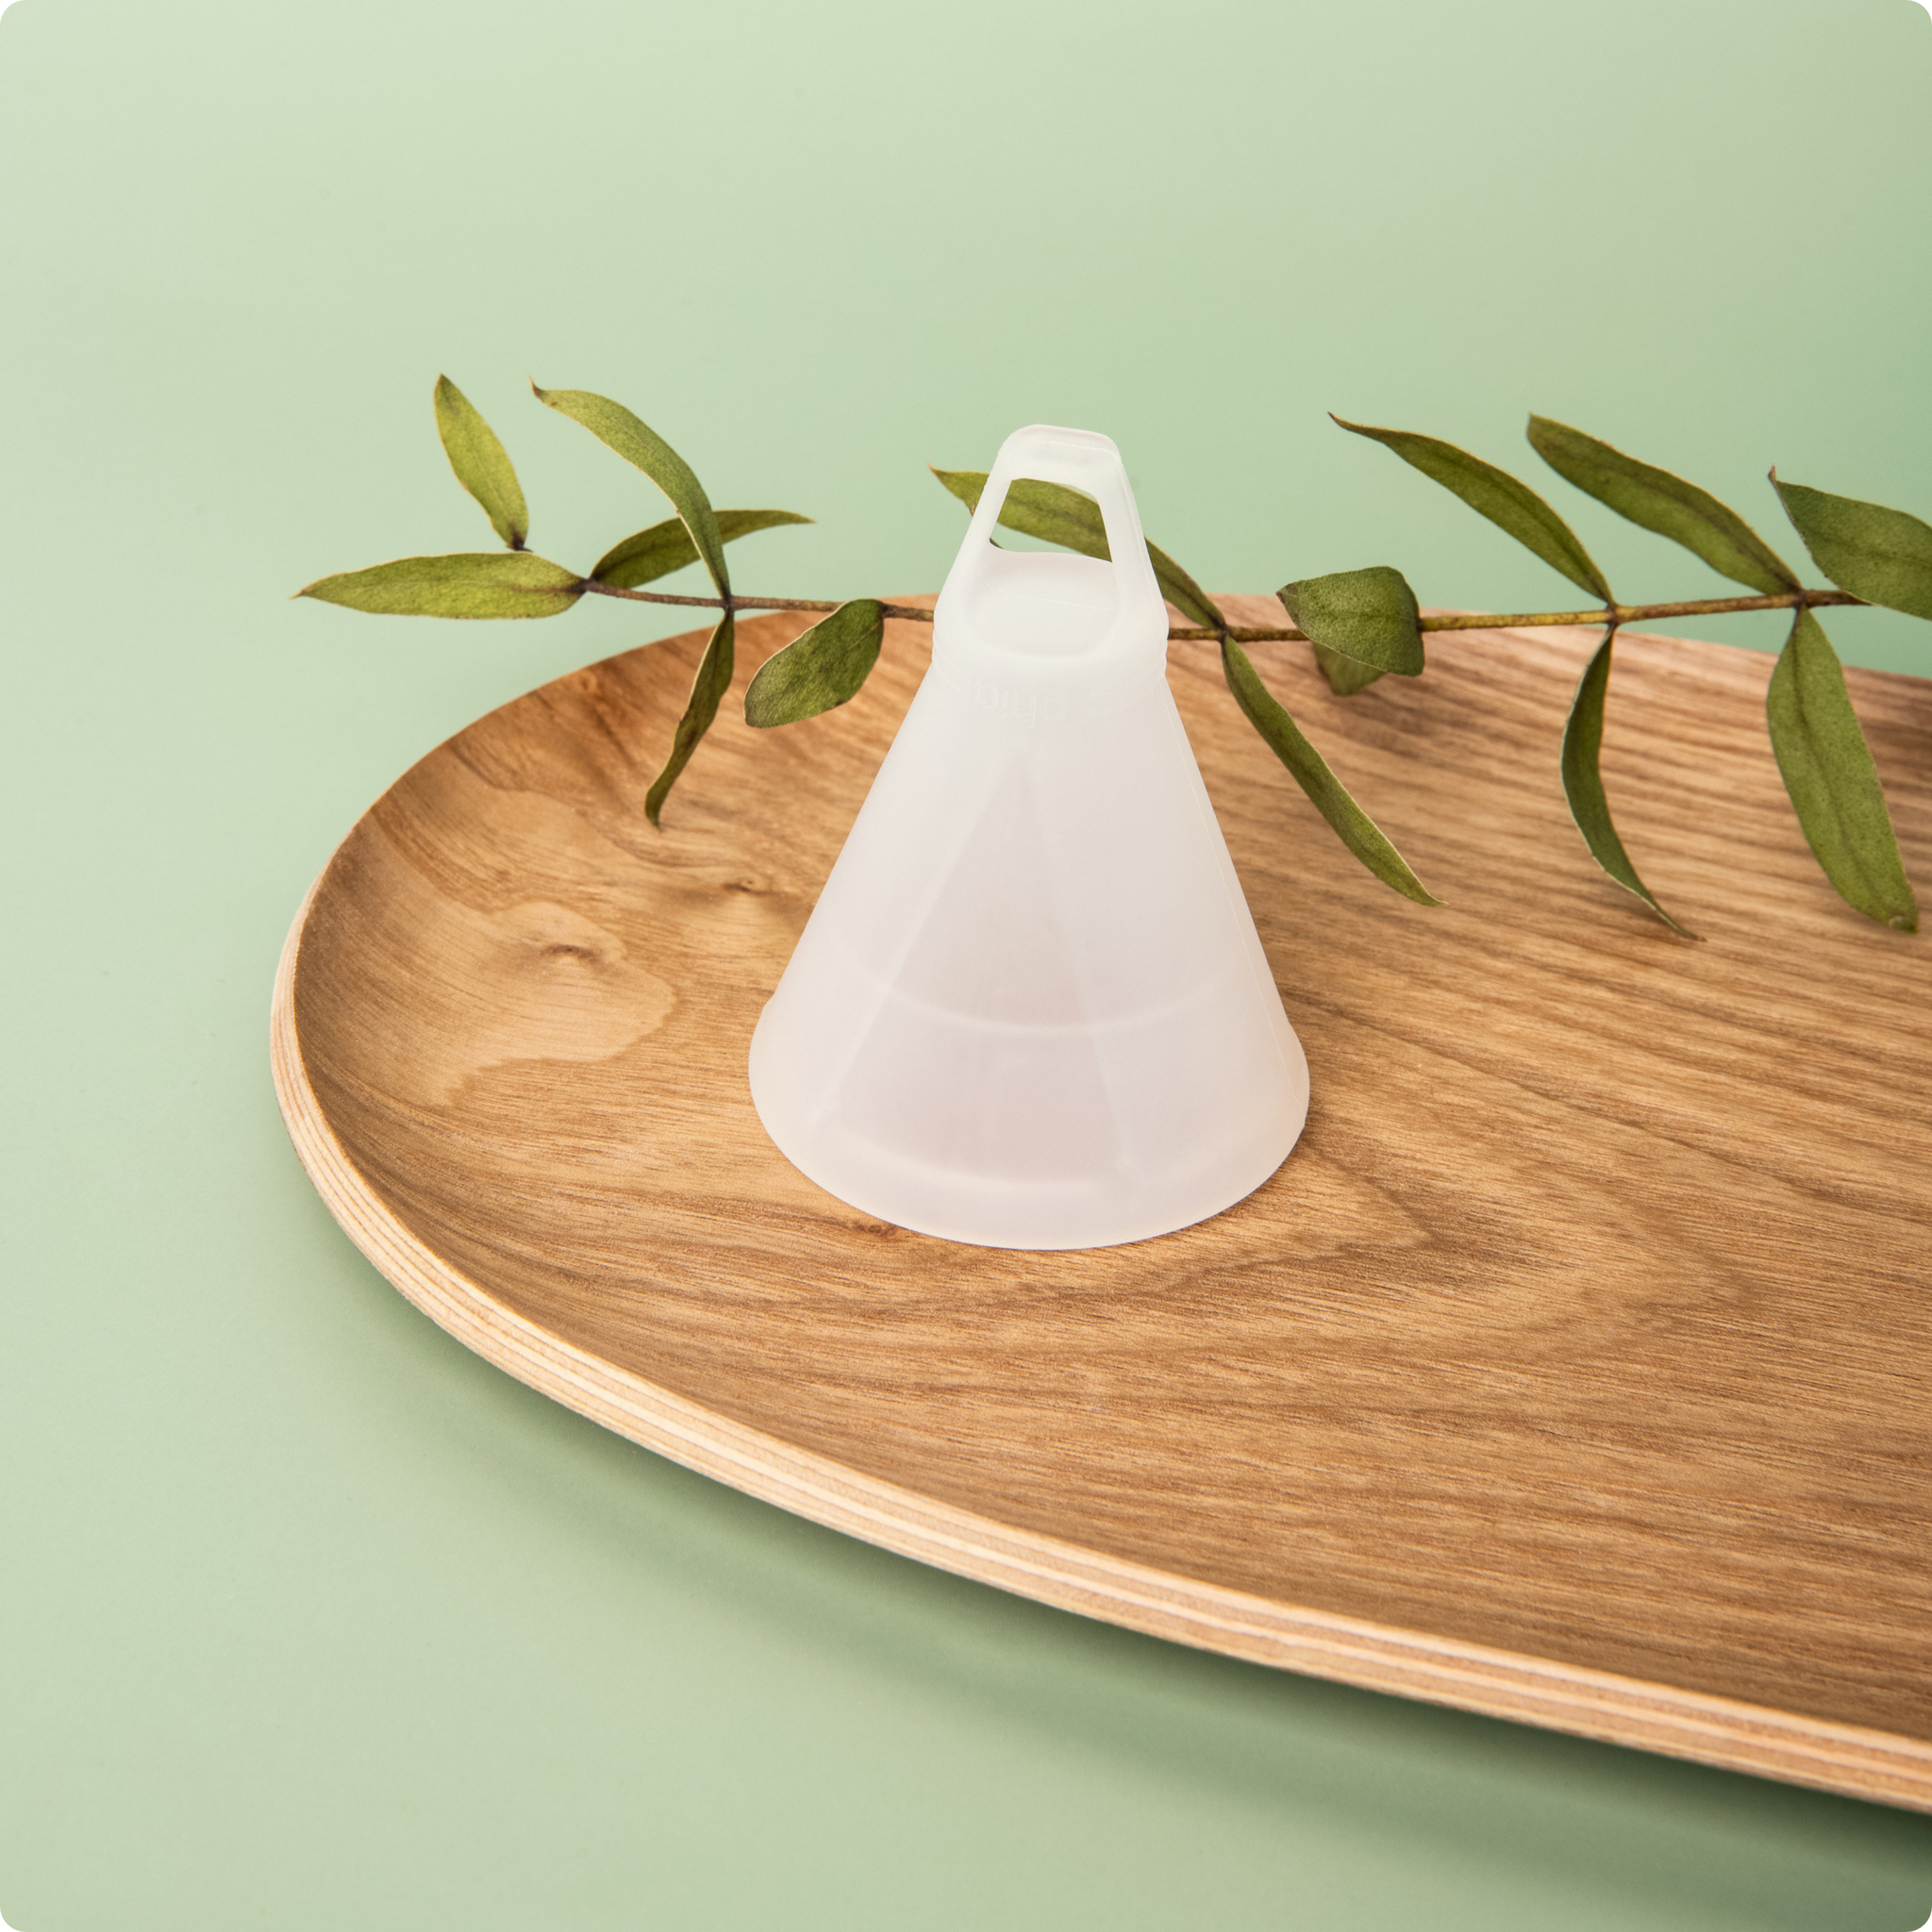 Phia Menstrual Cup on a wooden display